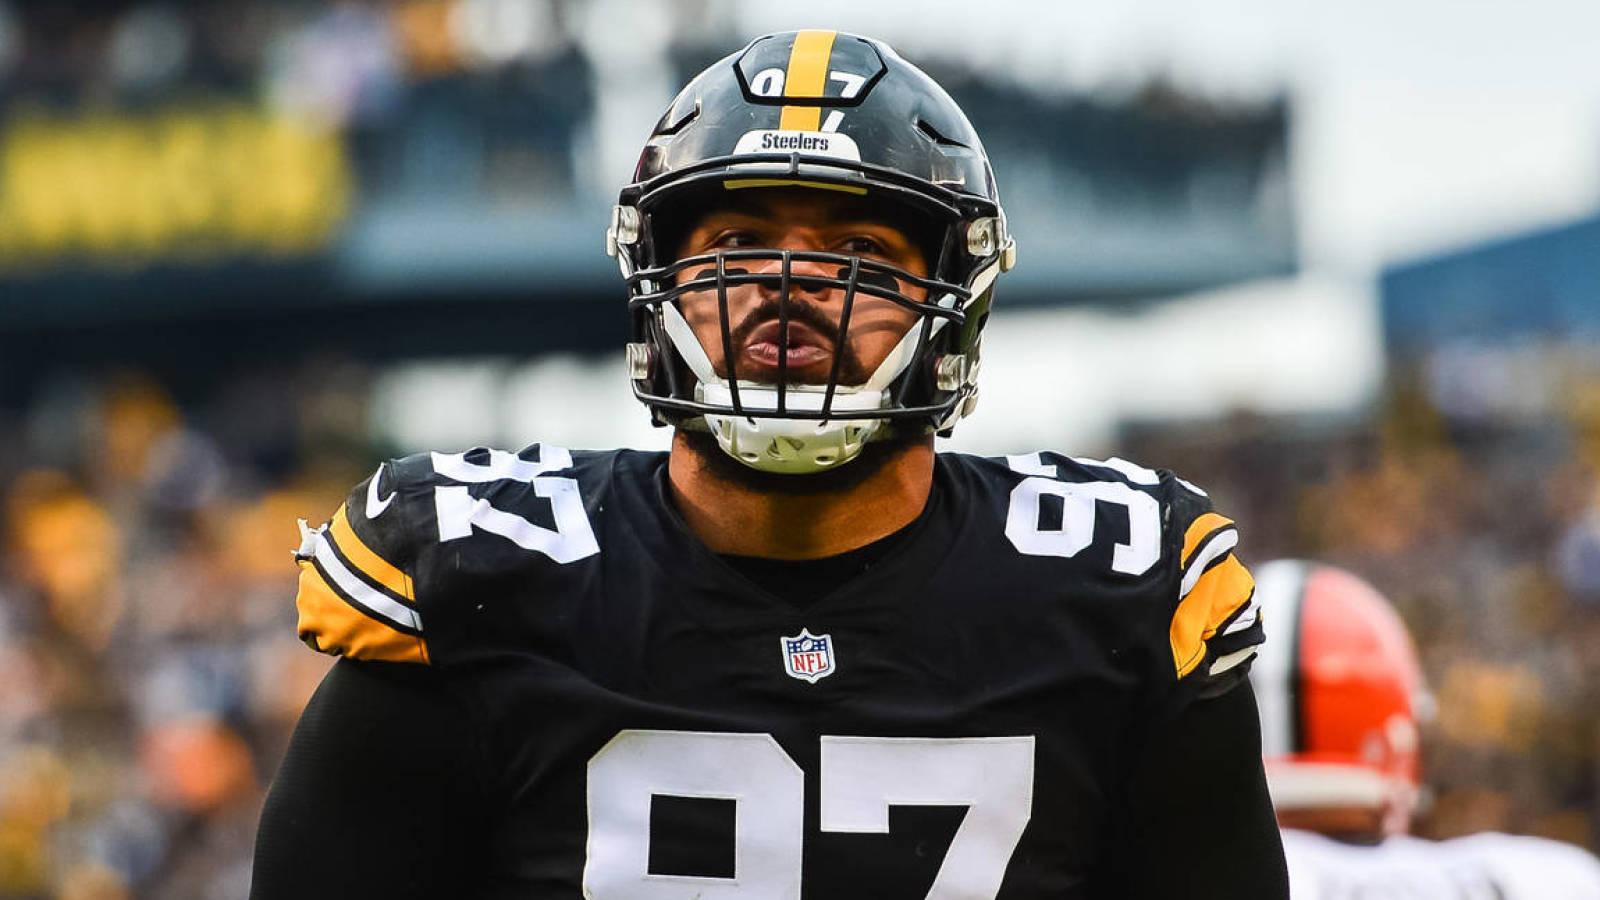 Cameron Heyward rips former teammate for Mike Tomlin criticism